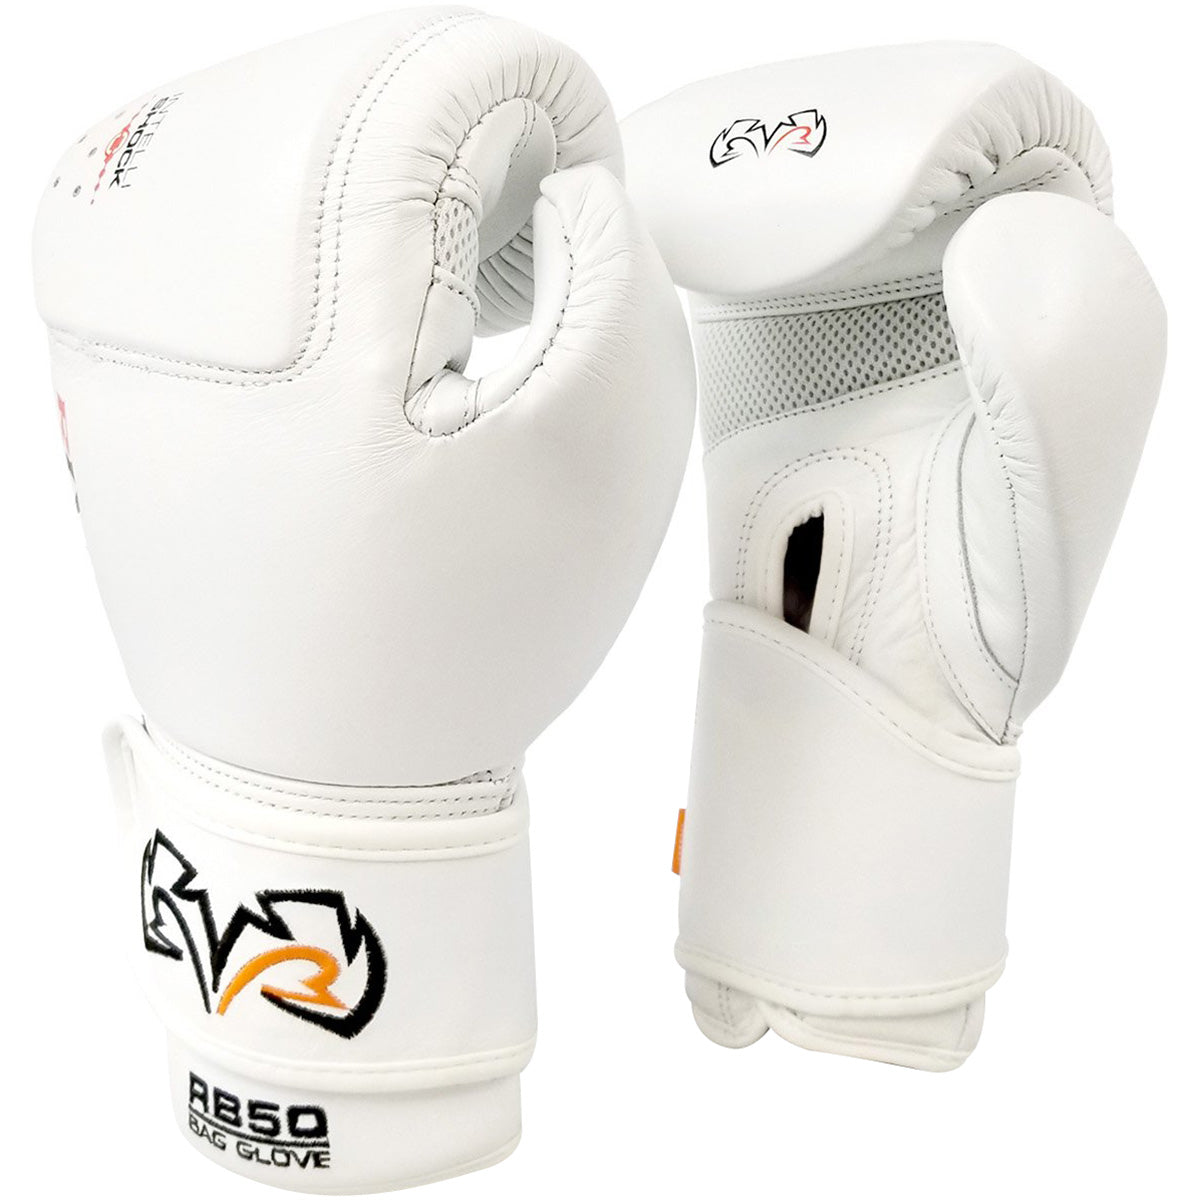 Rival Boxing RB50 Intelli-Shock Compact Bag Gloves RIVAL